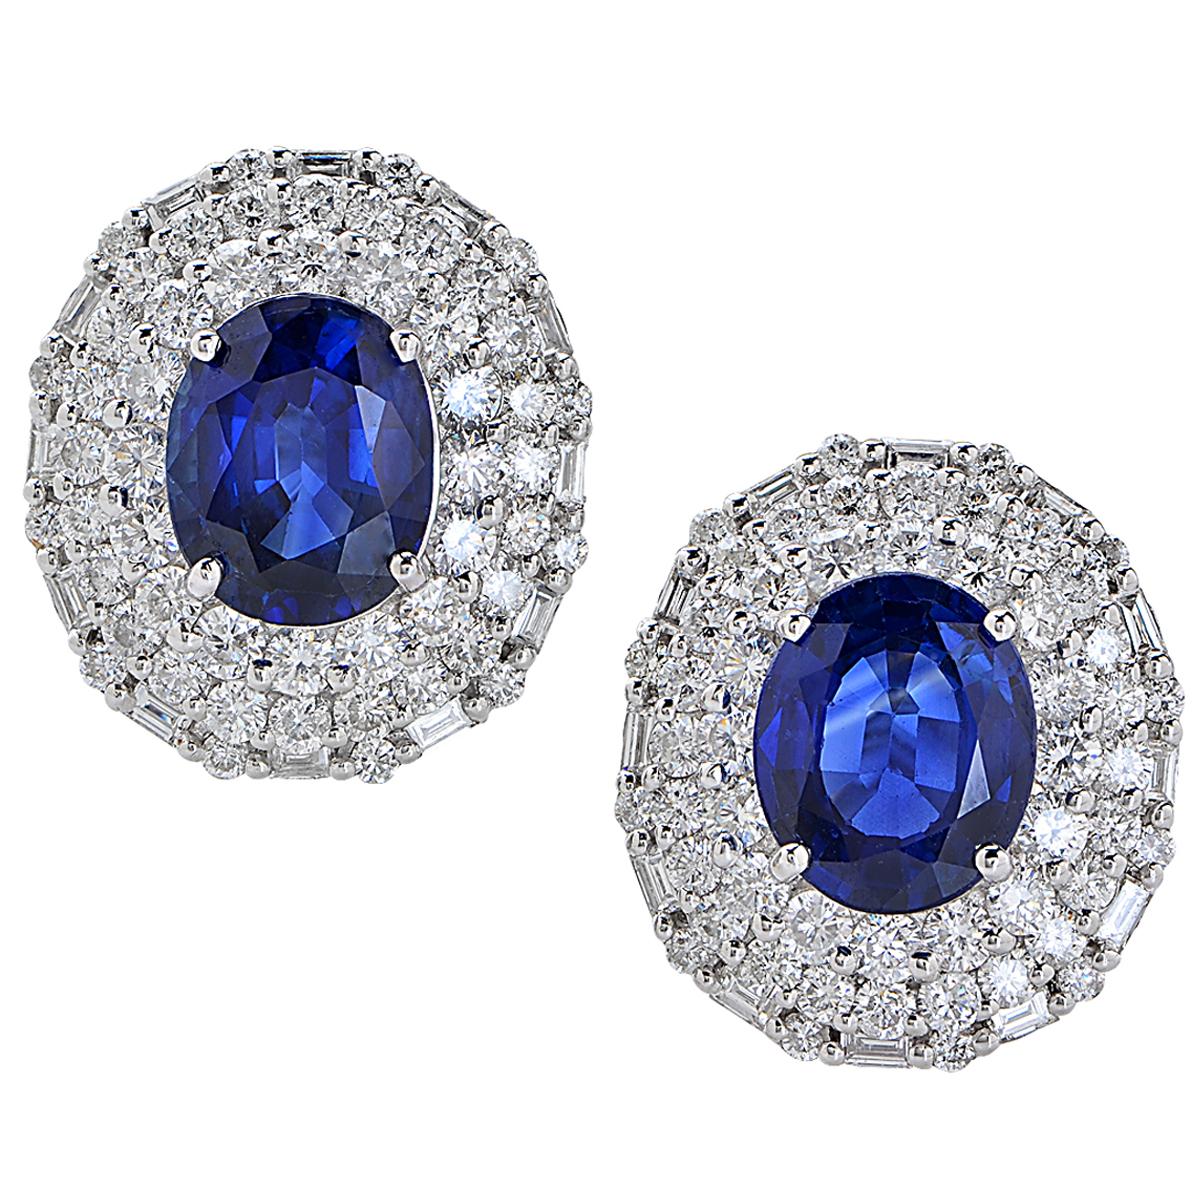 Oval Cut Impressive Sapphire and Diamond Necklace and earrings